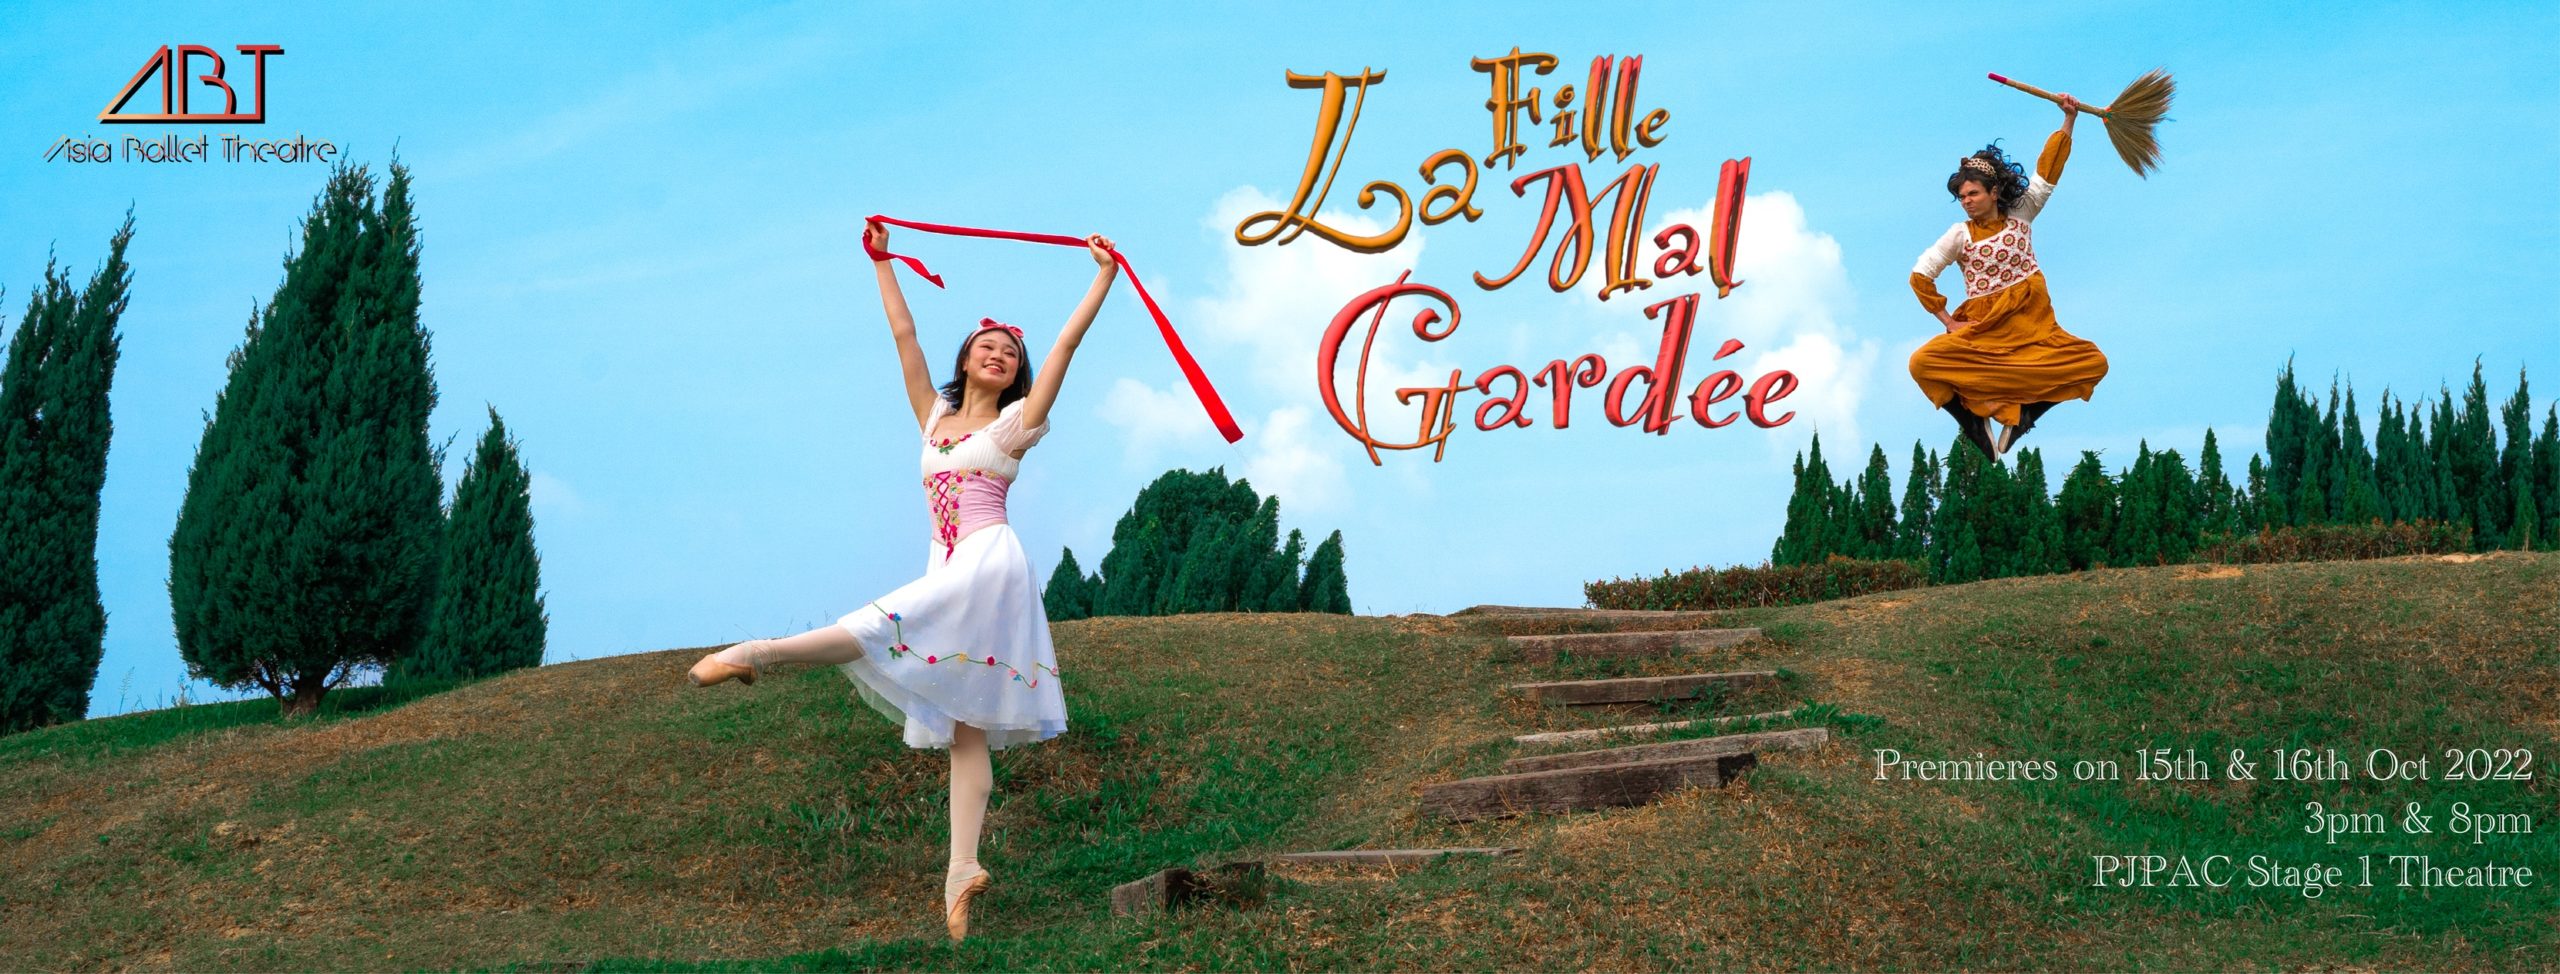 ARC Group is proud to announce the support to Asia Ballet Academy becoming a Platinum Sponsor for its production ¨La Fille Mal Gardée¨